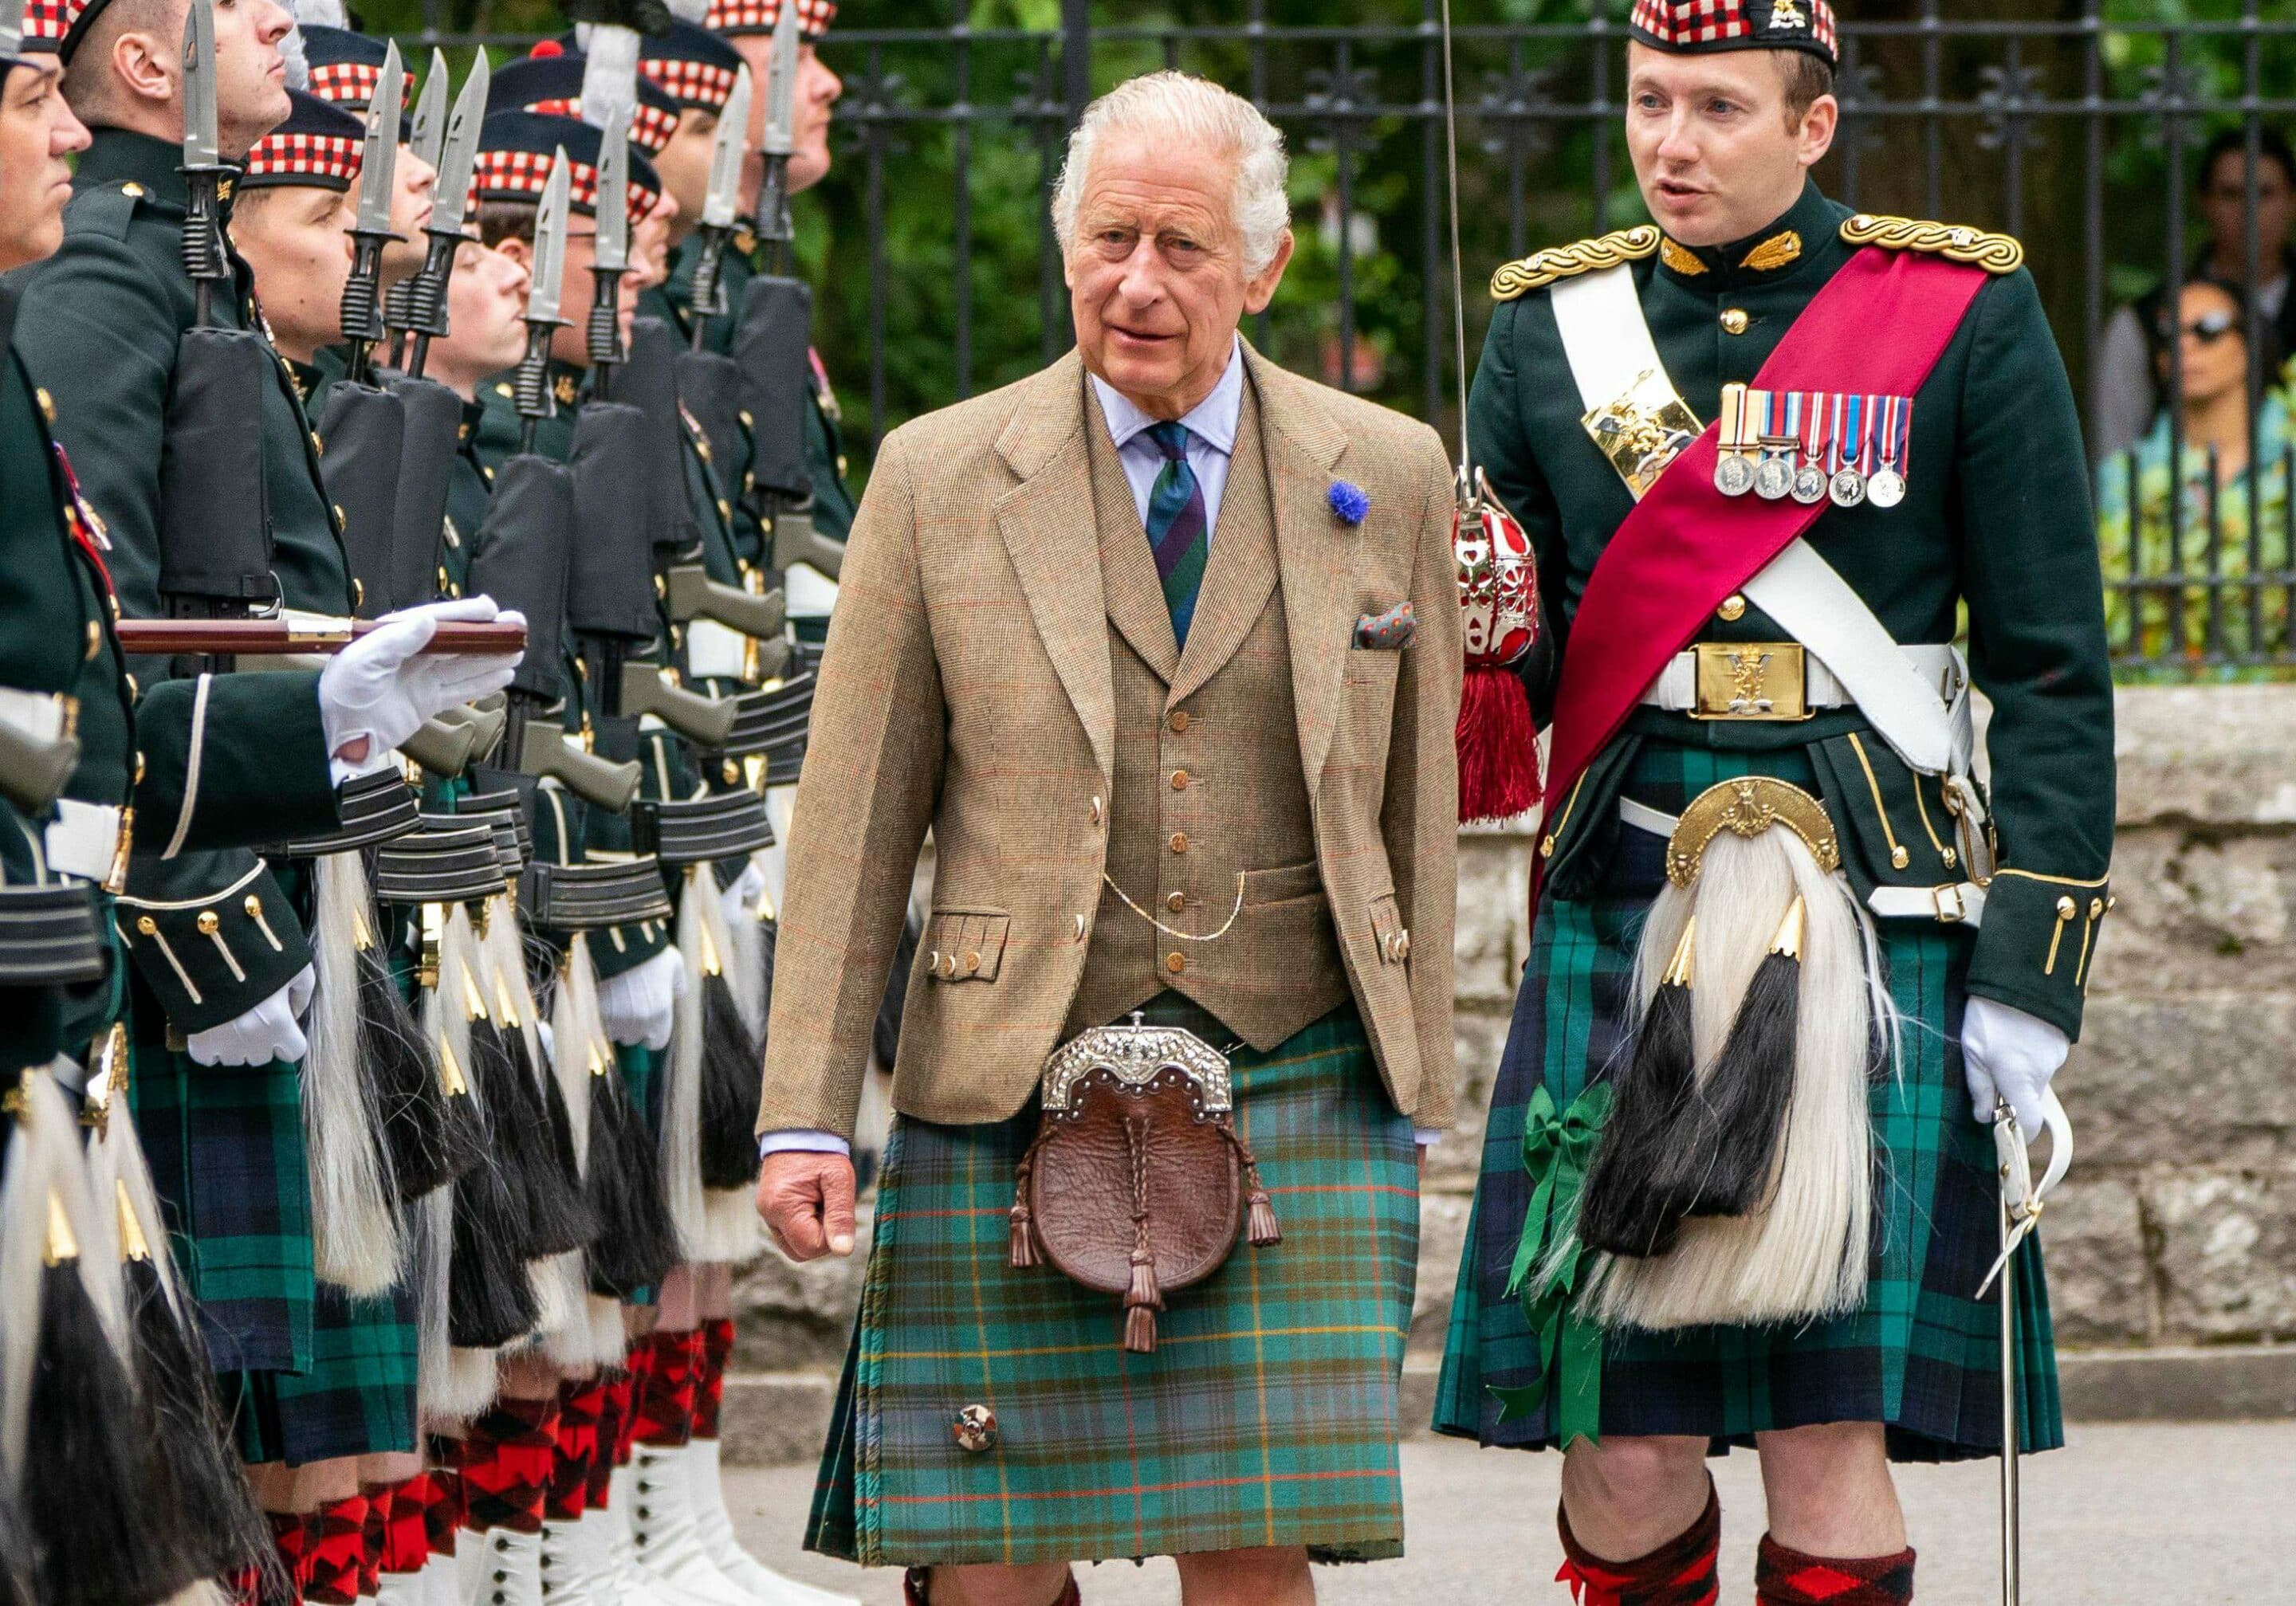 Charles III passe ses troupes en revue à Balmoral. Credit: Photo by Jane Barlow/WPA Pool/Shutterstock (14061685ag)